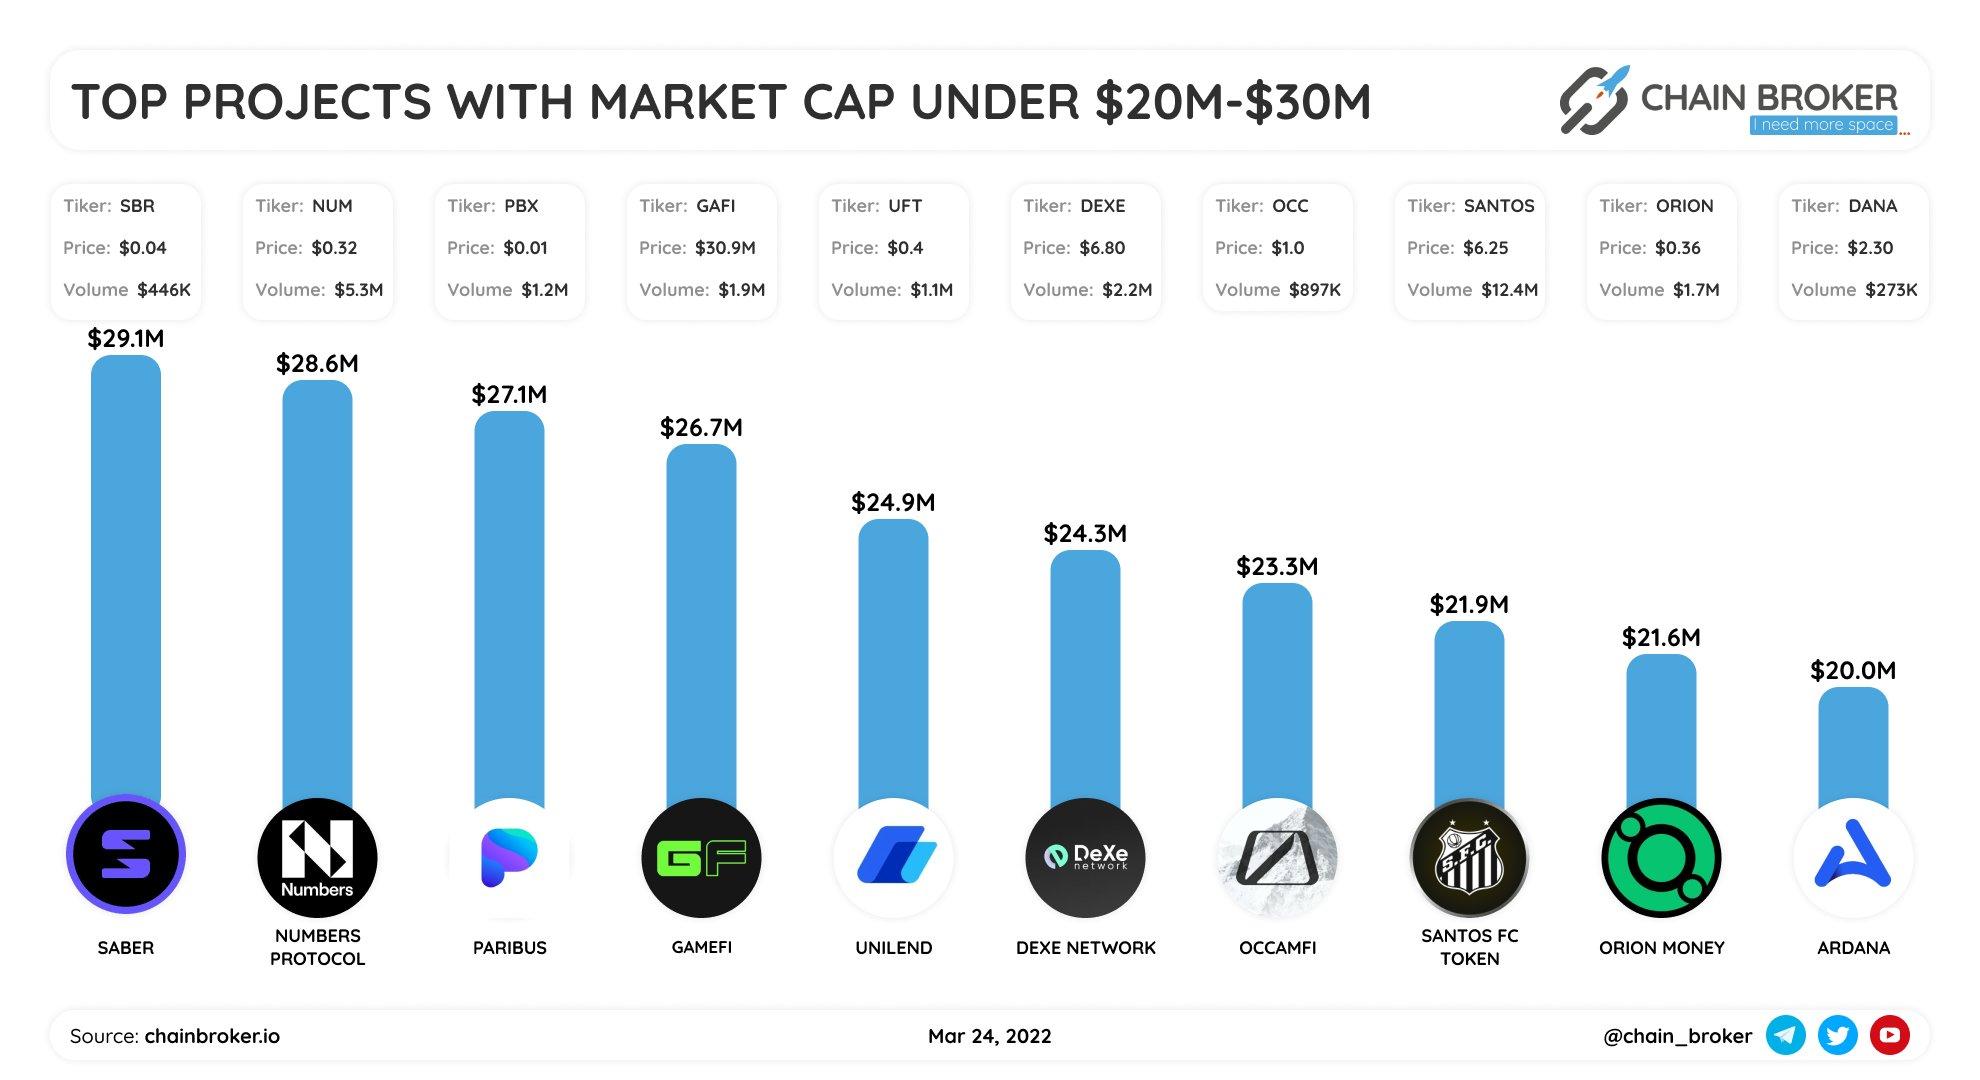 Top projects with market cap $20M-$30M